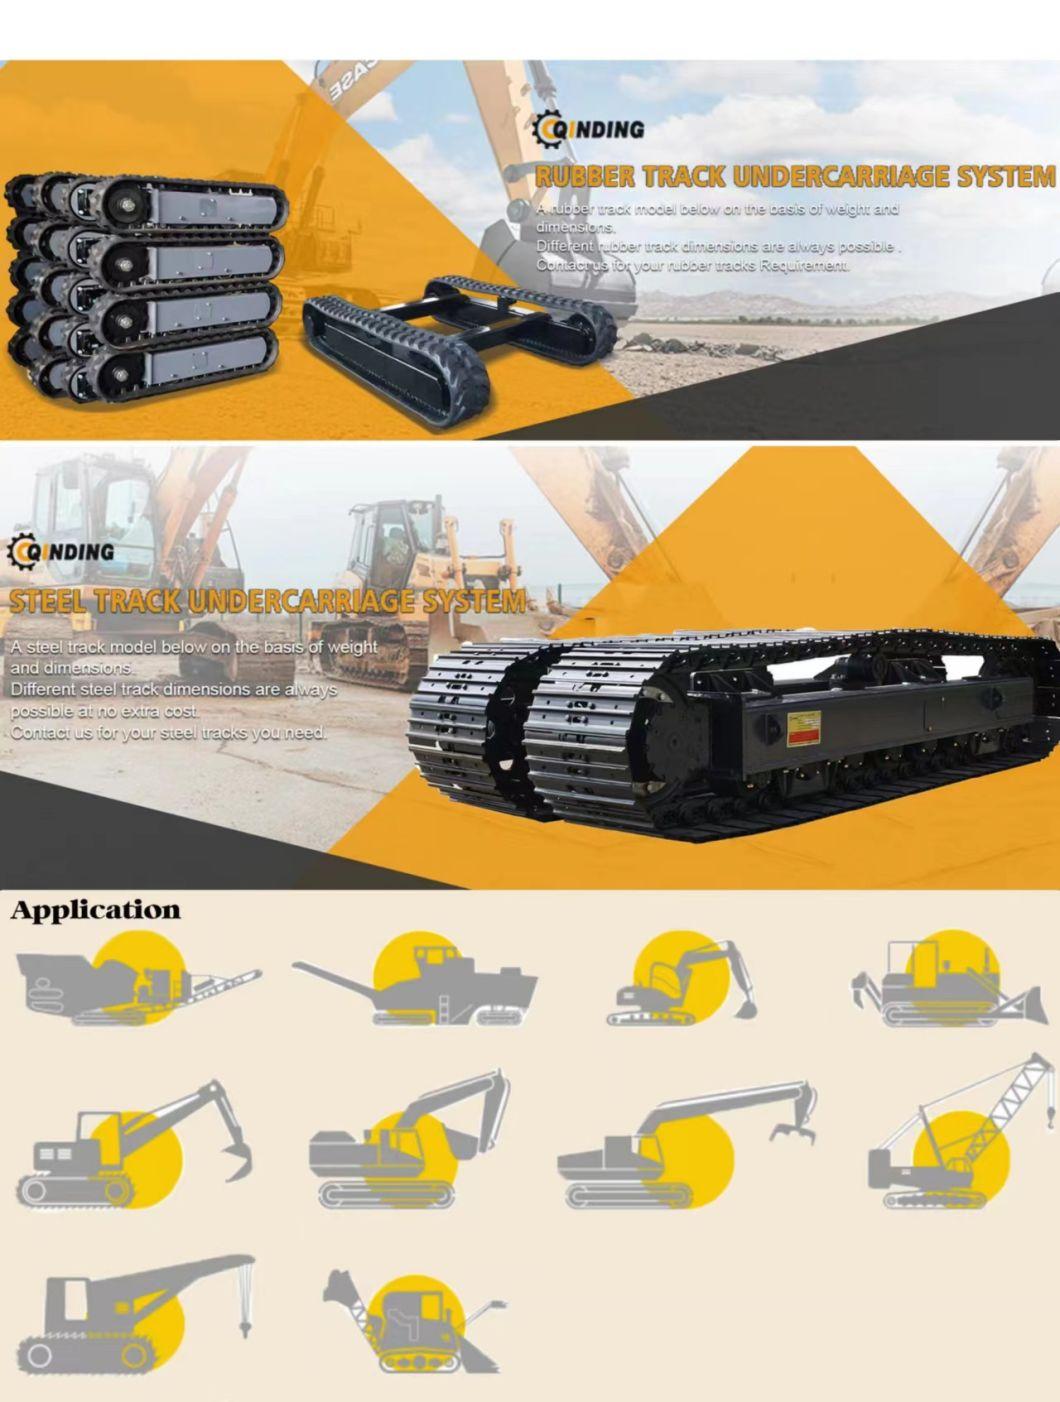 Qdrt-2t Rubber Crawler Track Undercarriage for Hydraulic Construction Machinery (Drilling Rig mini excavator, mini loader)